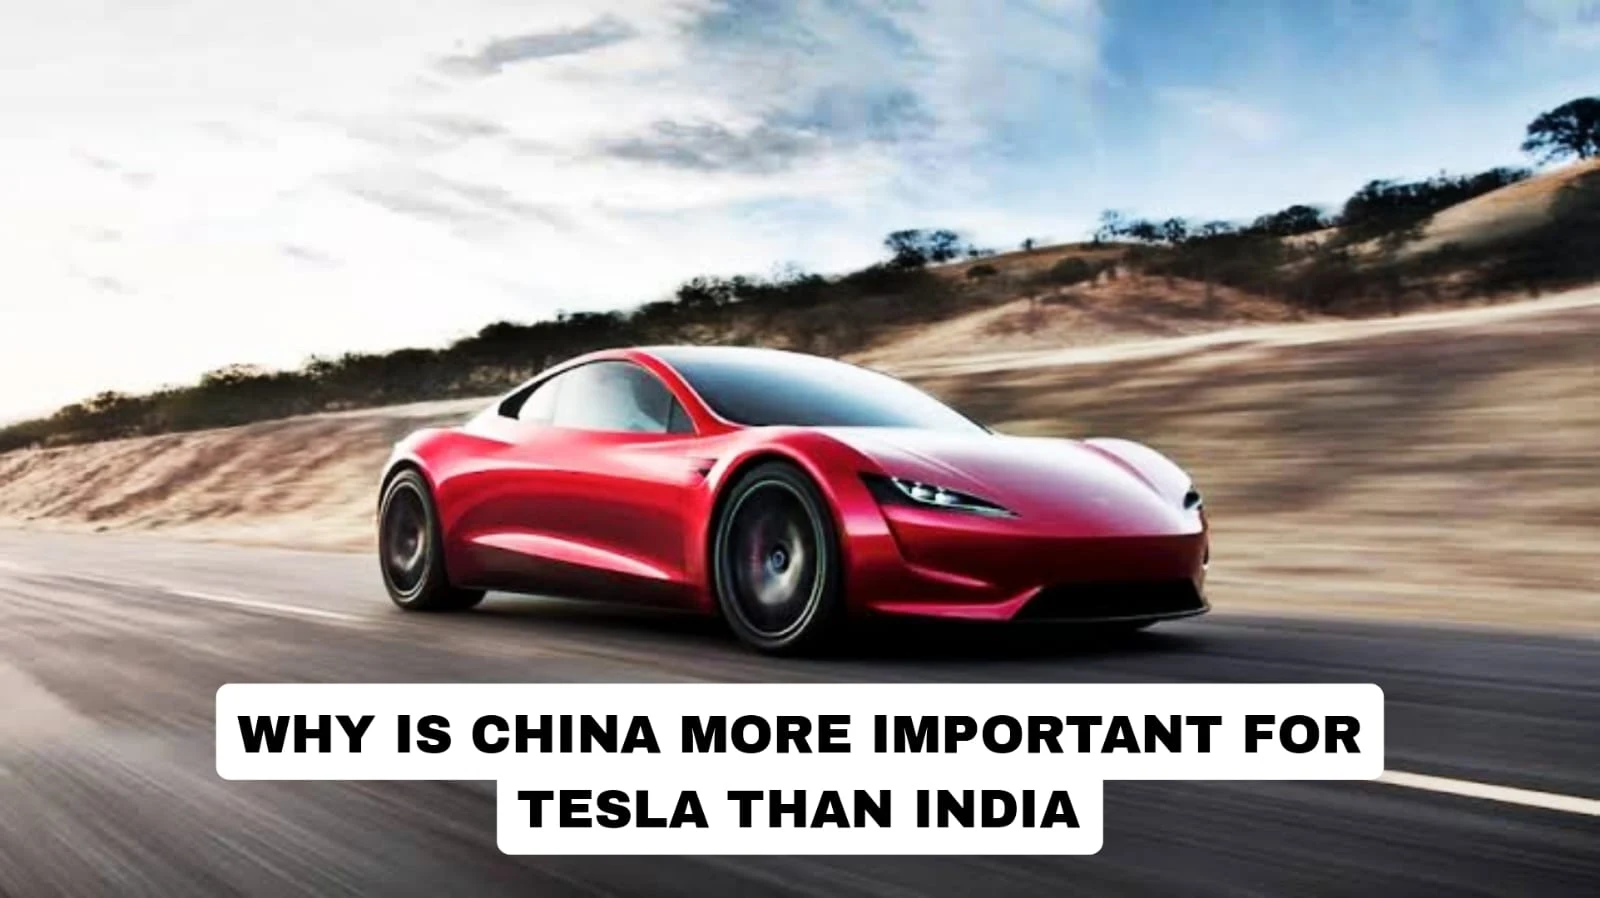 Why is China more important for Tesla than India